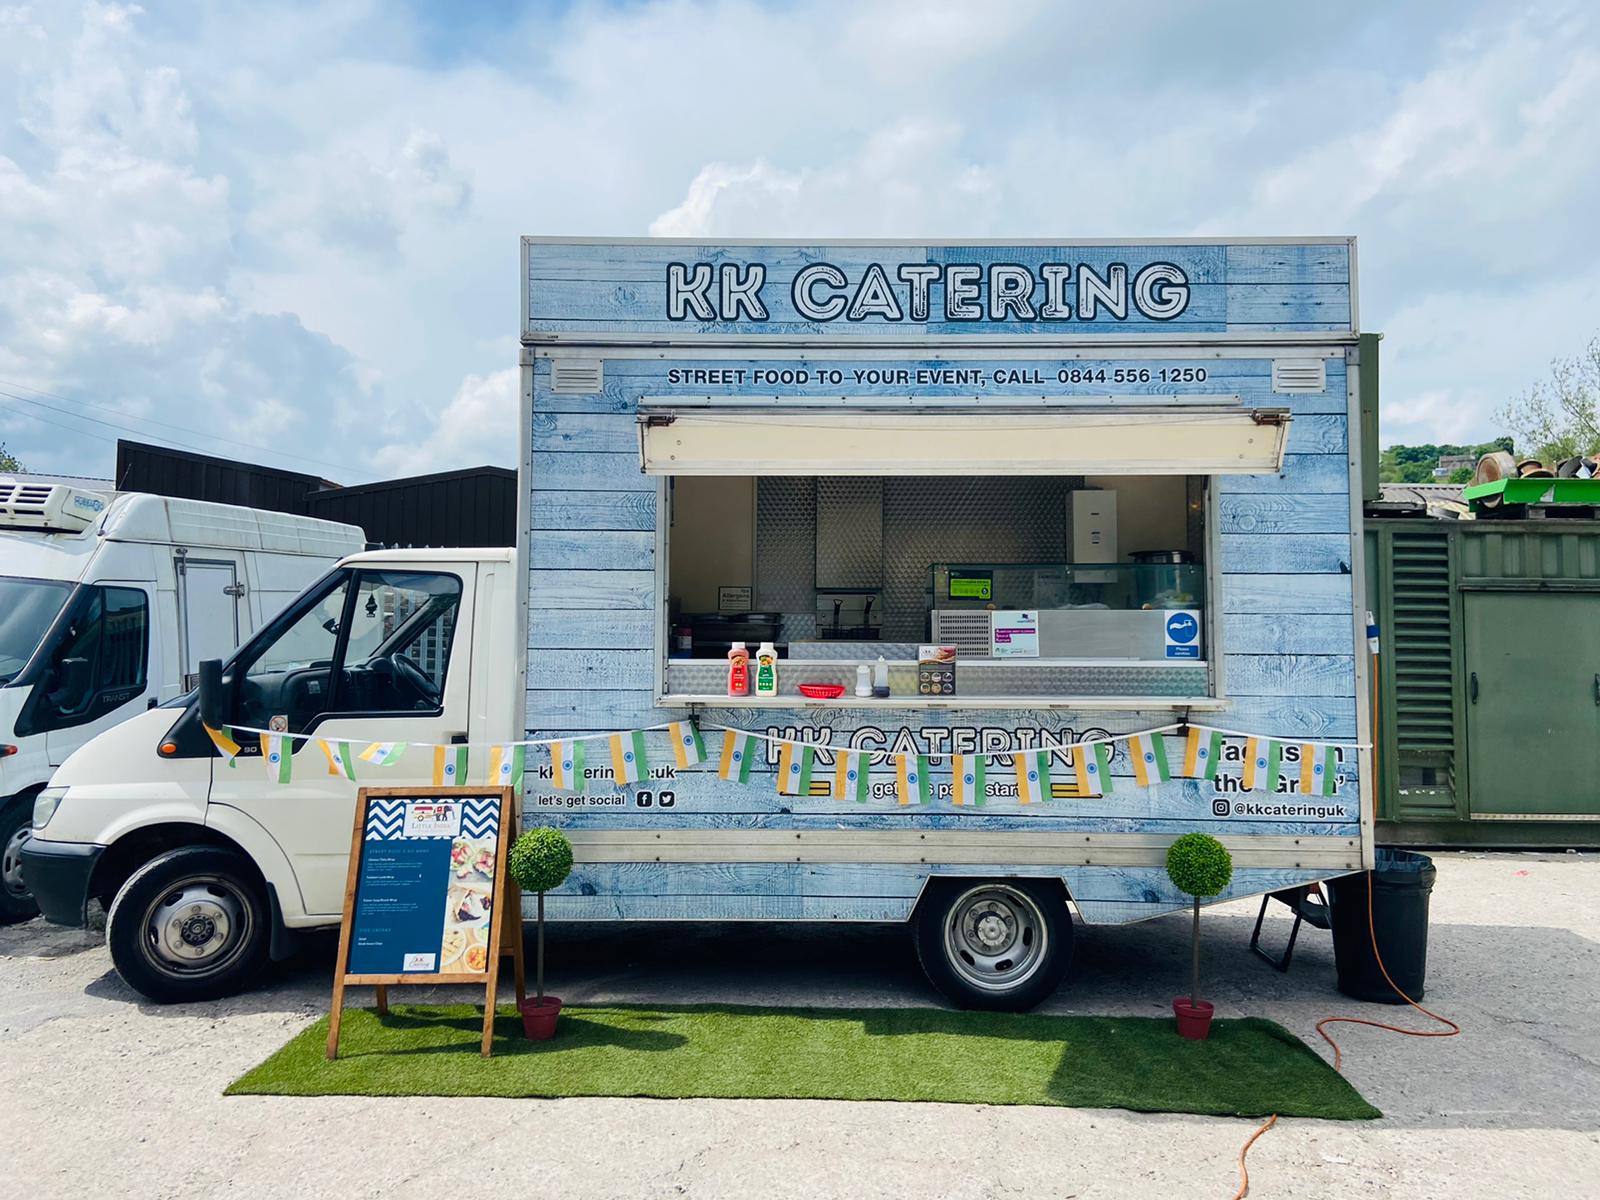 Indian Street food catering vanfrom kk catering